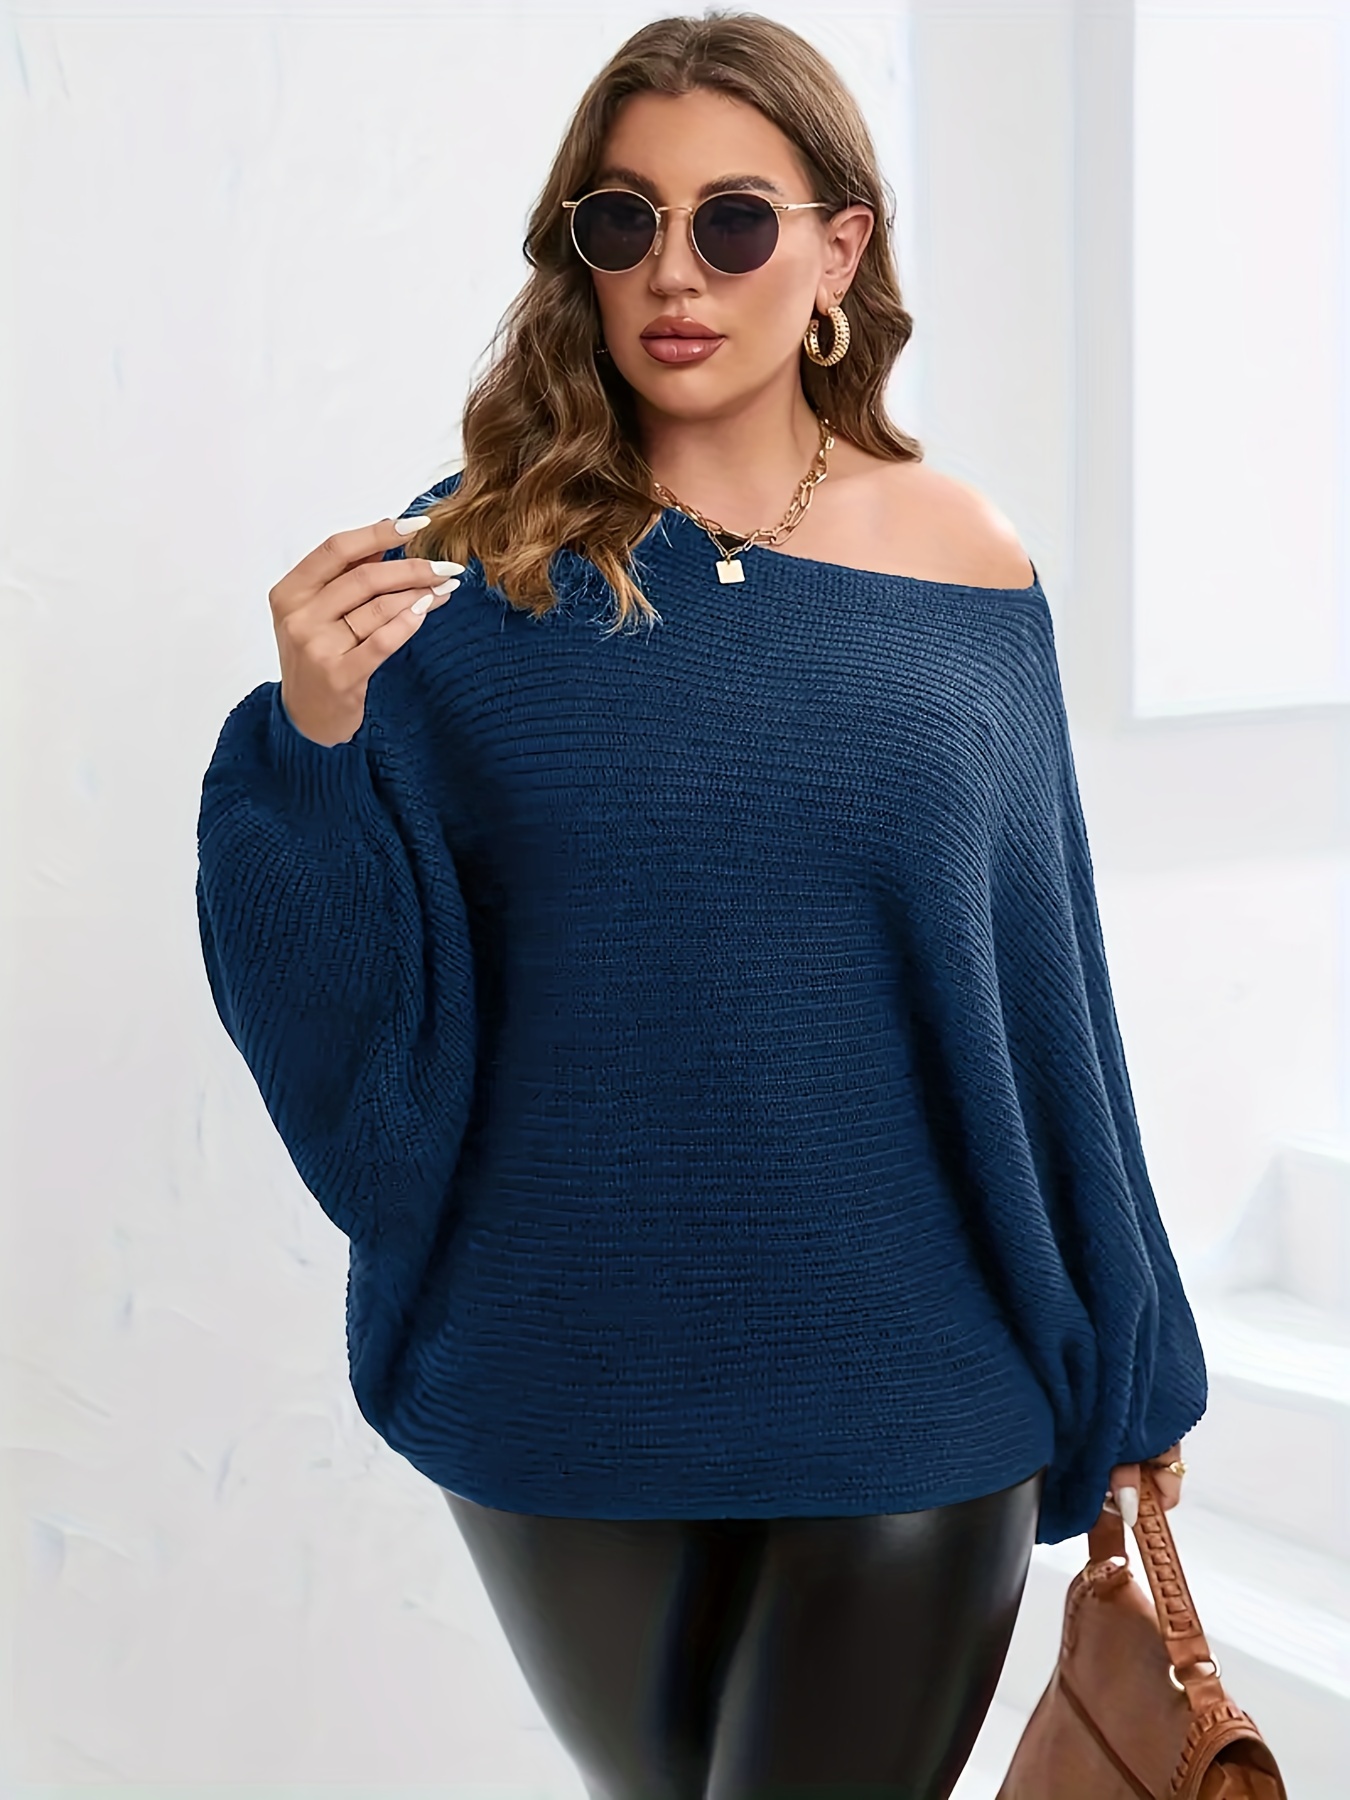 CHUOAND Womens Off The Shoulder Sweater,womens 2x tops plus size